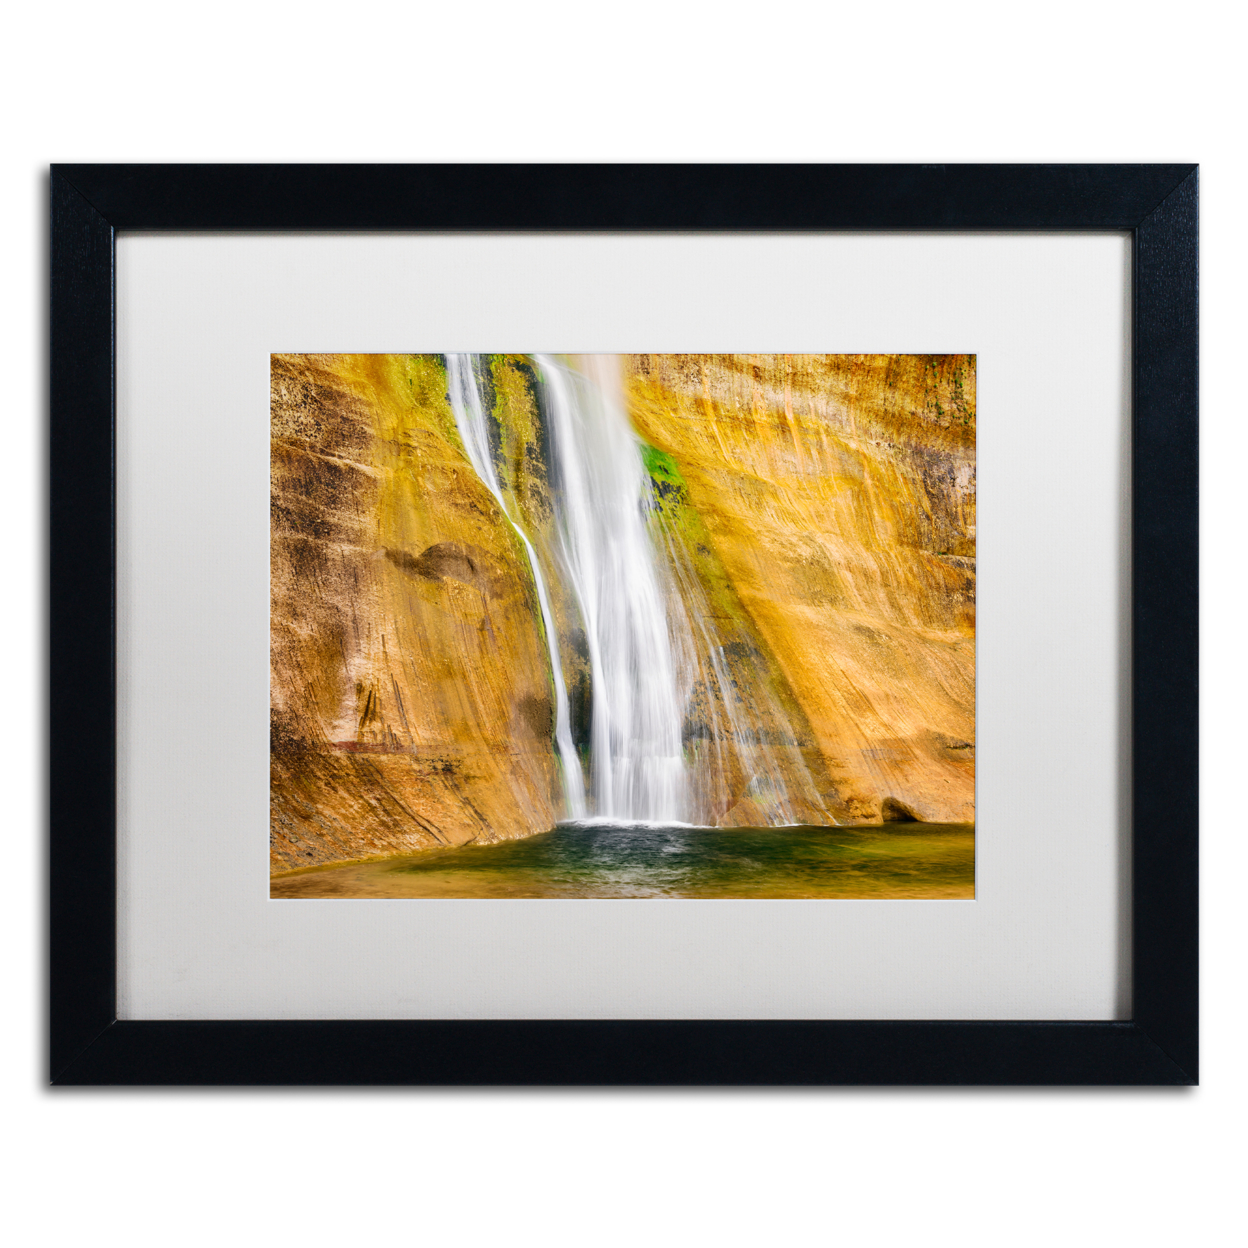 Michael Blanchette Photography 'Ribbons 2' Black Wooden Framed Art 18 X 22 Inches